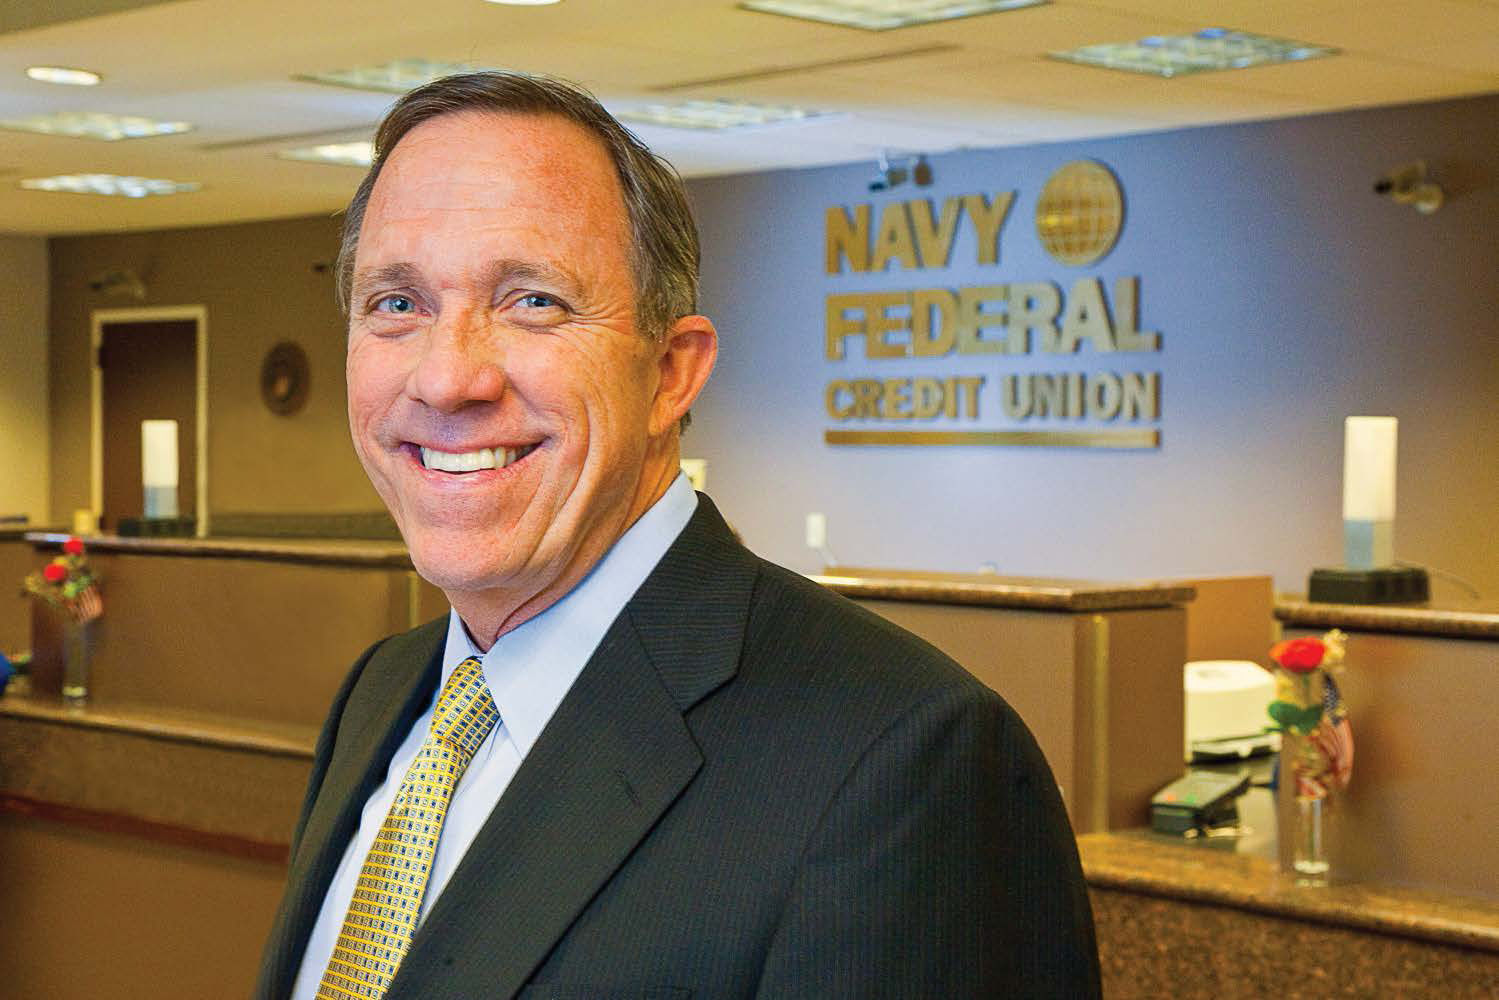 Cutler Dawson, the CEO at Vienna, Virginia-based Navy Federal Credit Union comes in at No. 76 on the list. (Courtesy Navy Federal Credit Union)